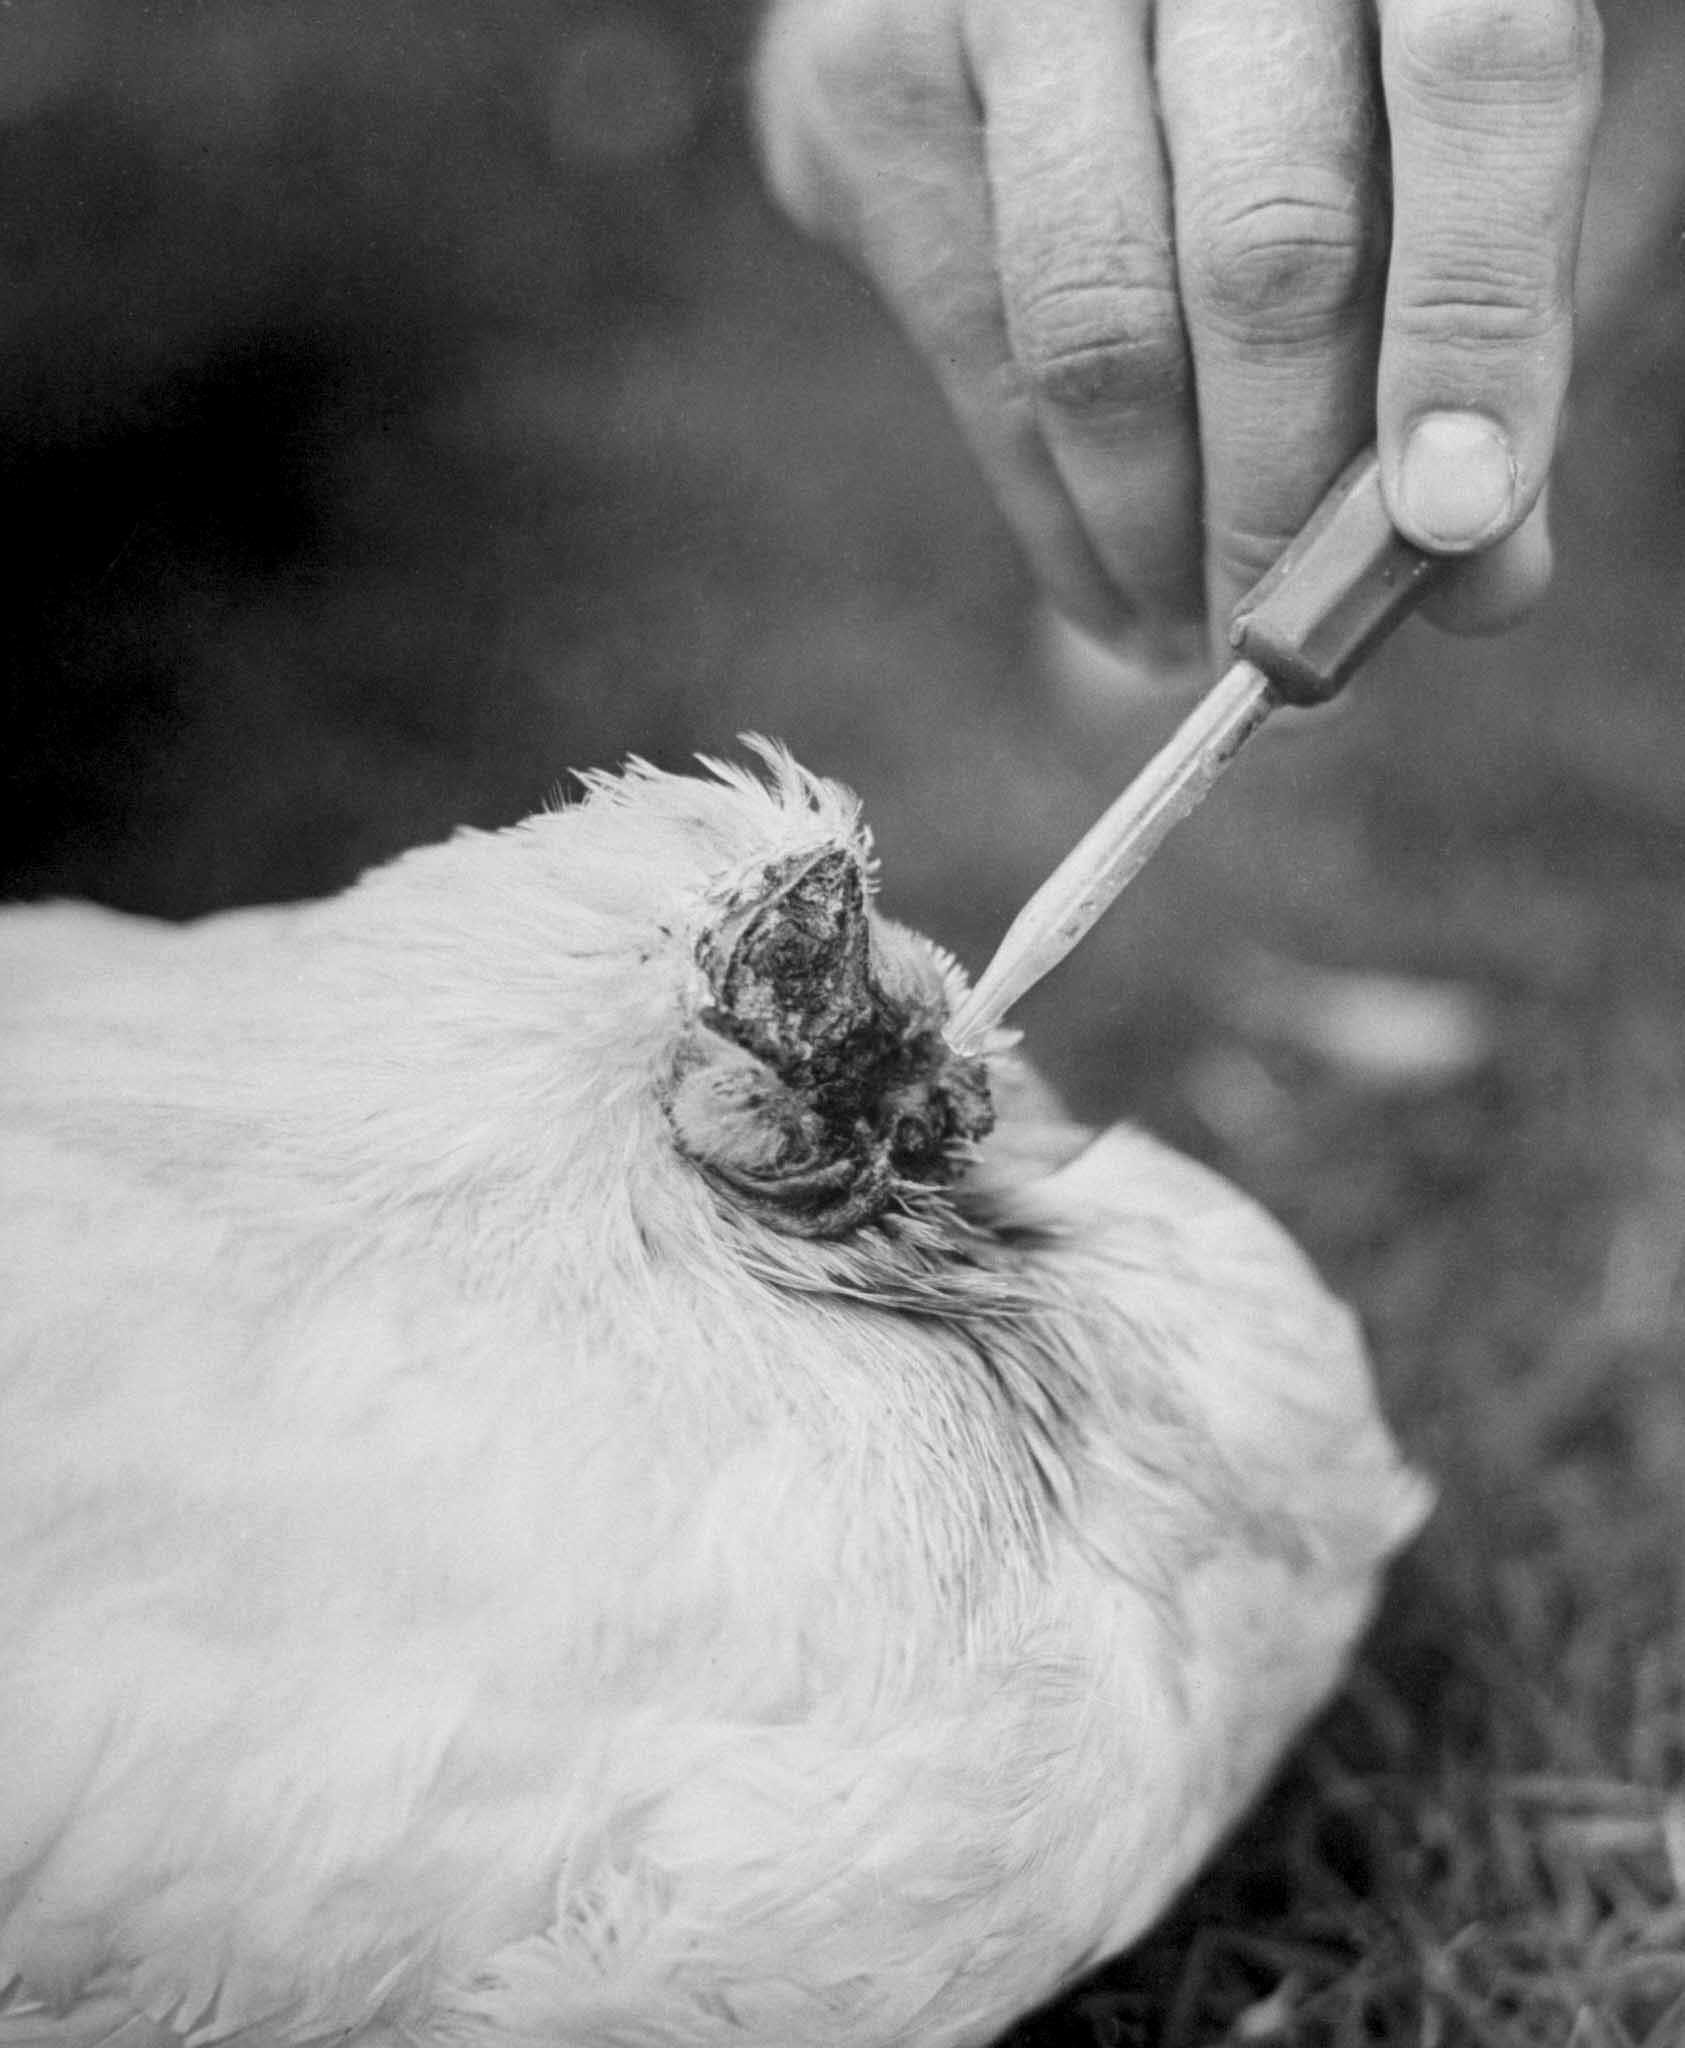 Mike the headless chicken is fed through an eye dropper, directly into his esophagus, in 1945.